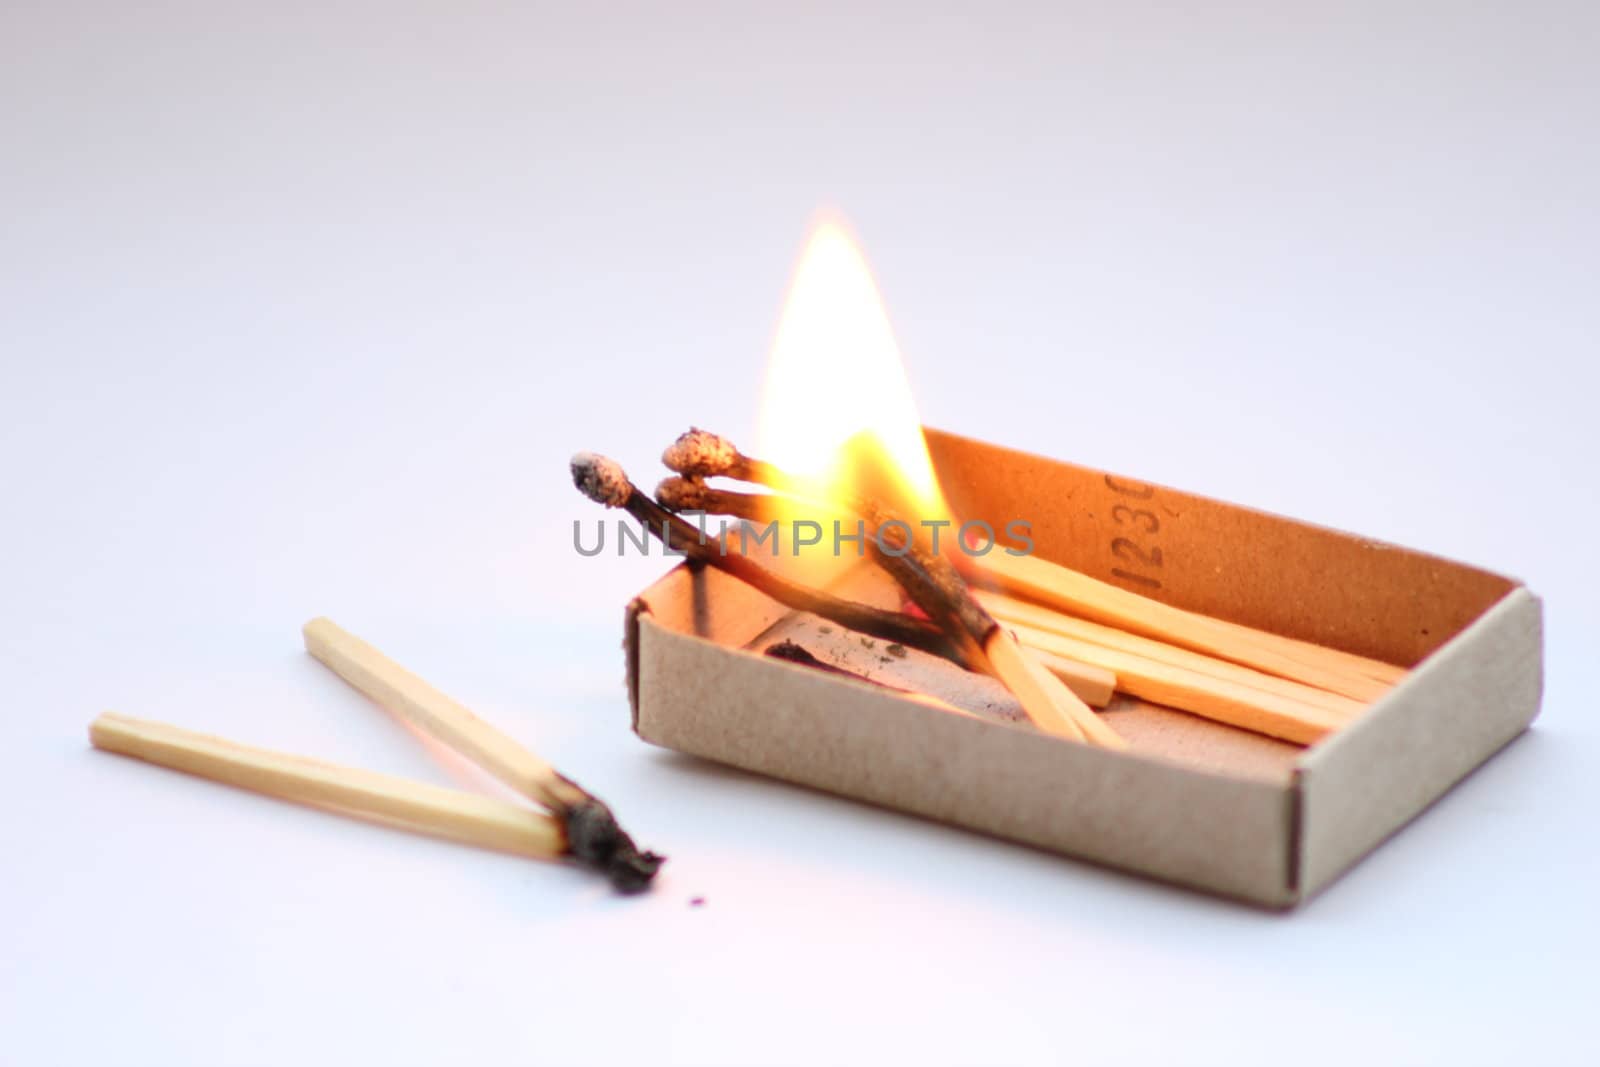 Burning Matches by abhbah05